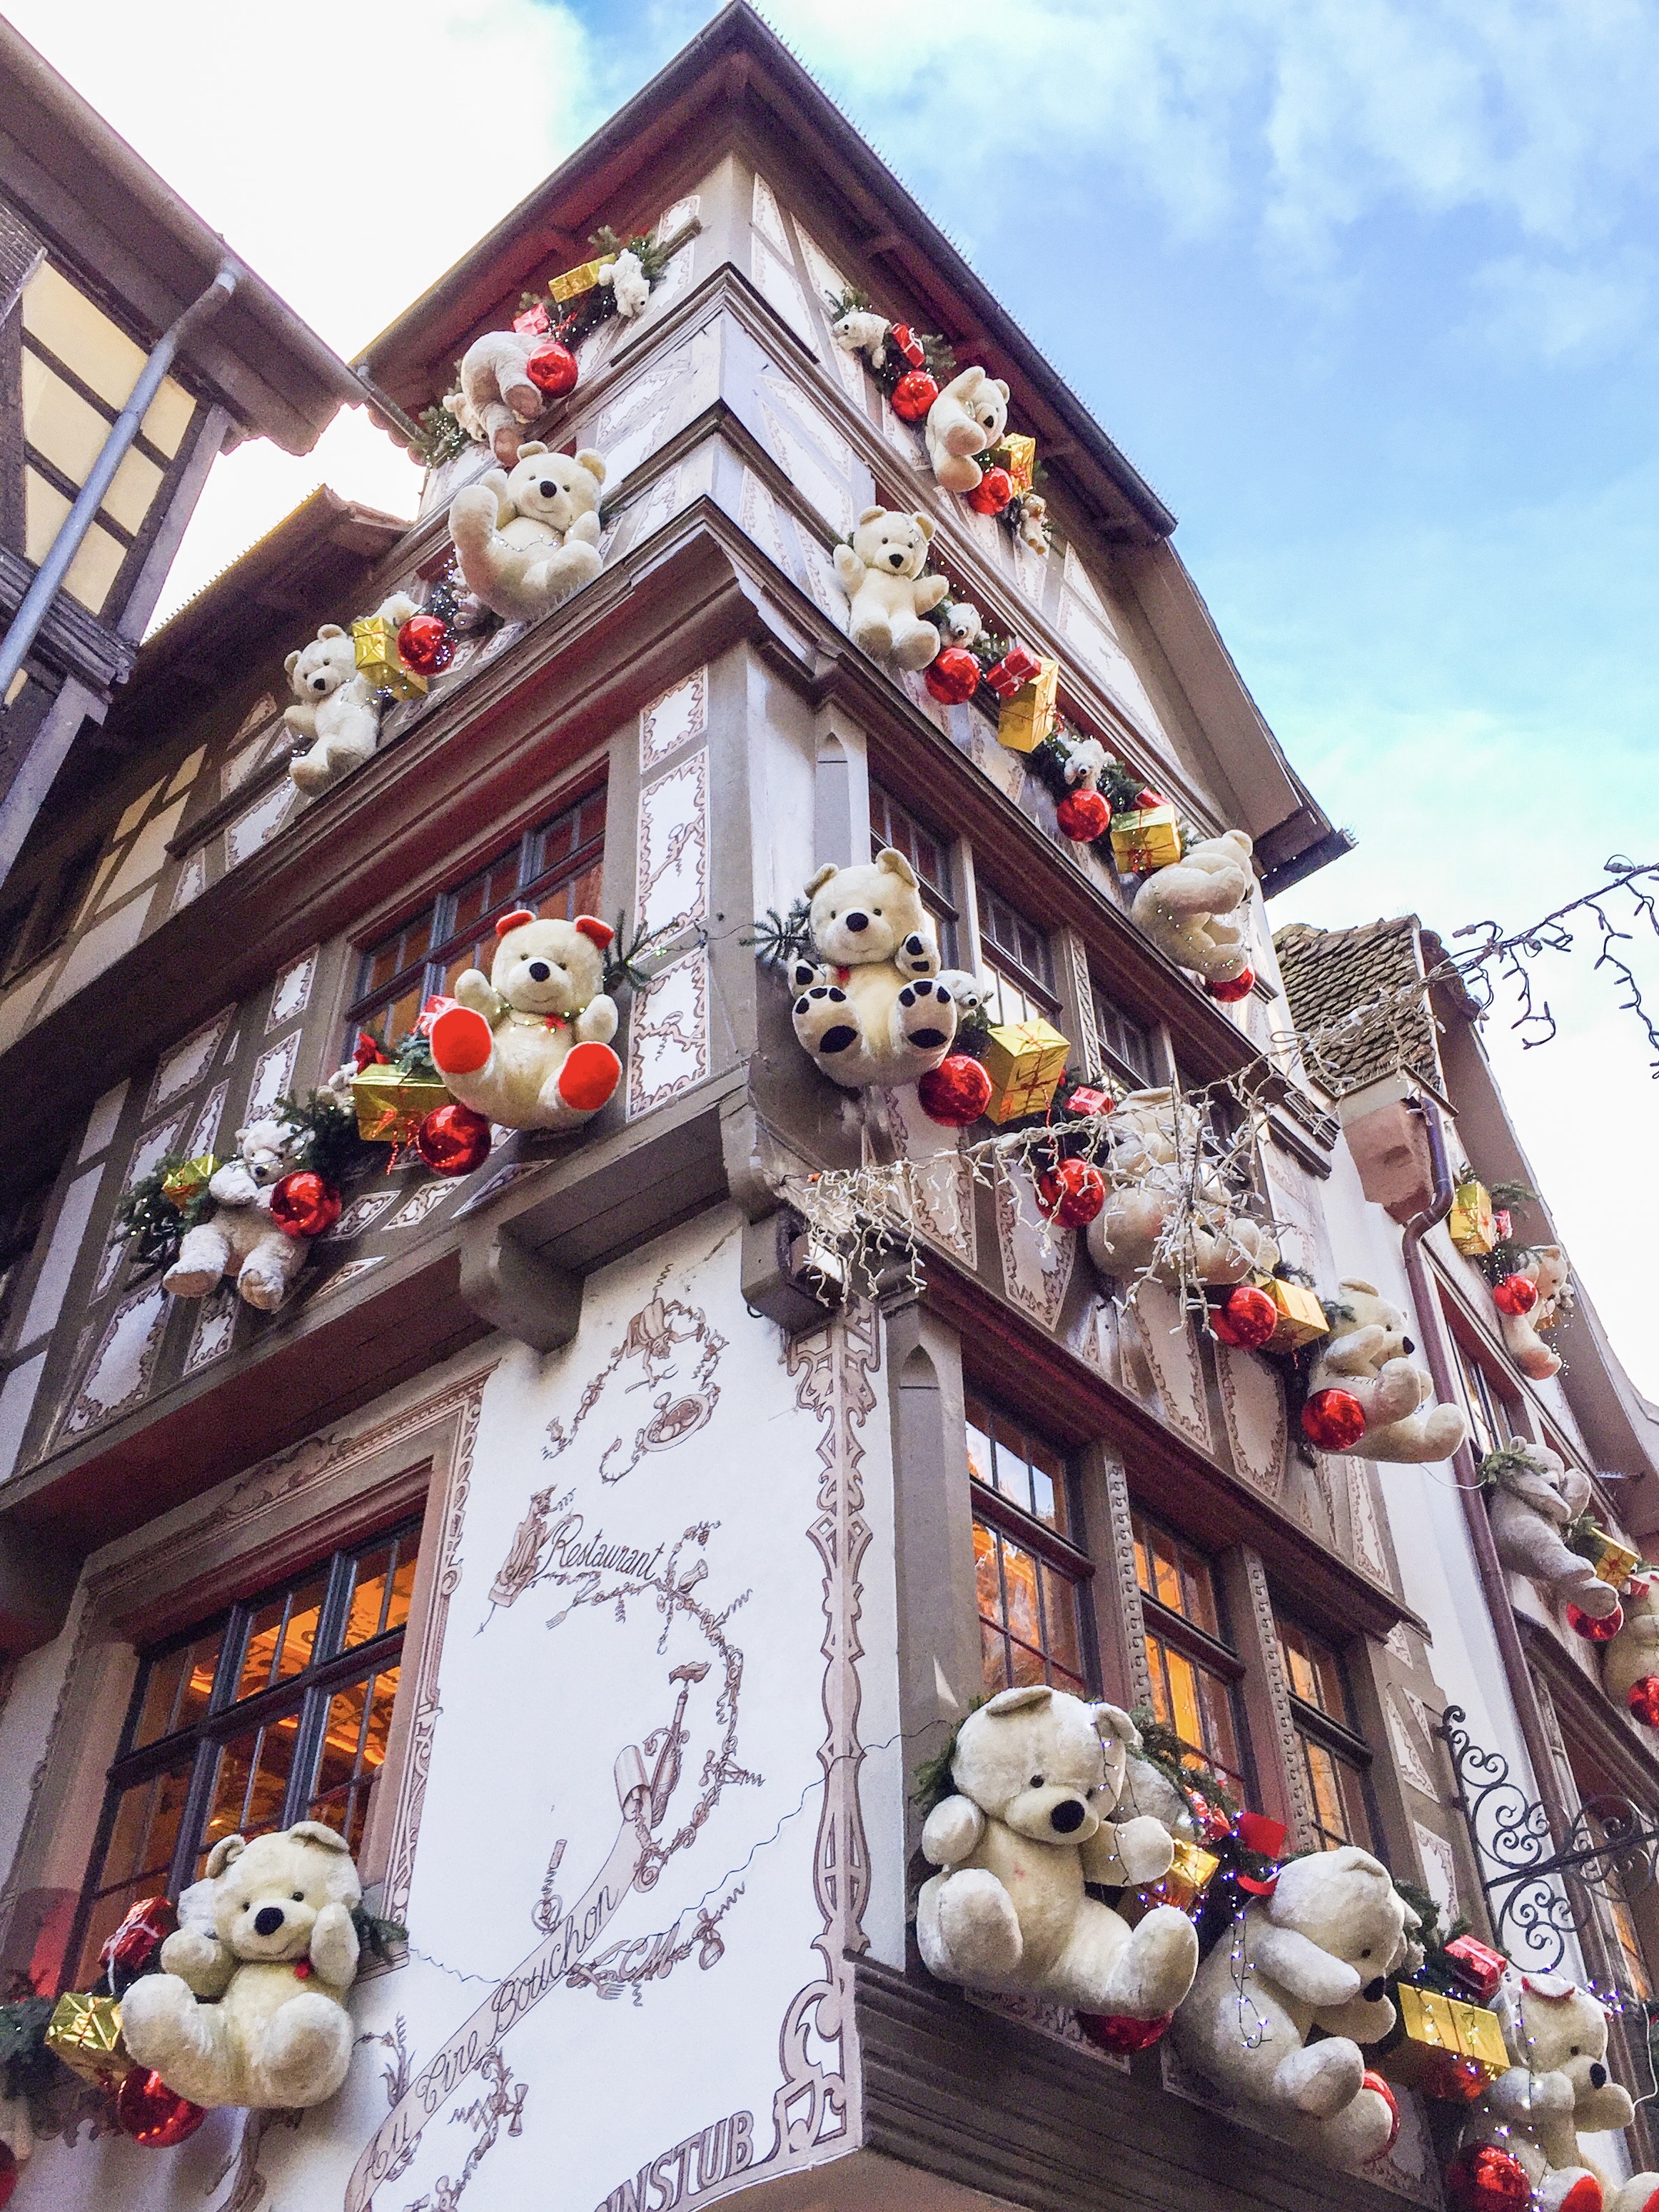 Strasbourg decorations at Christmas